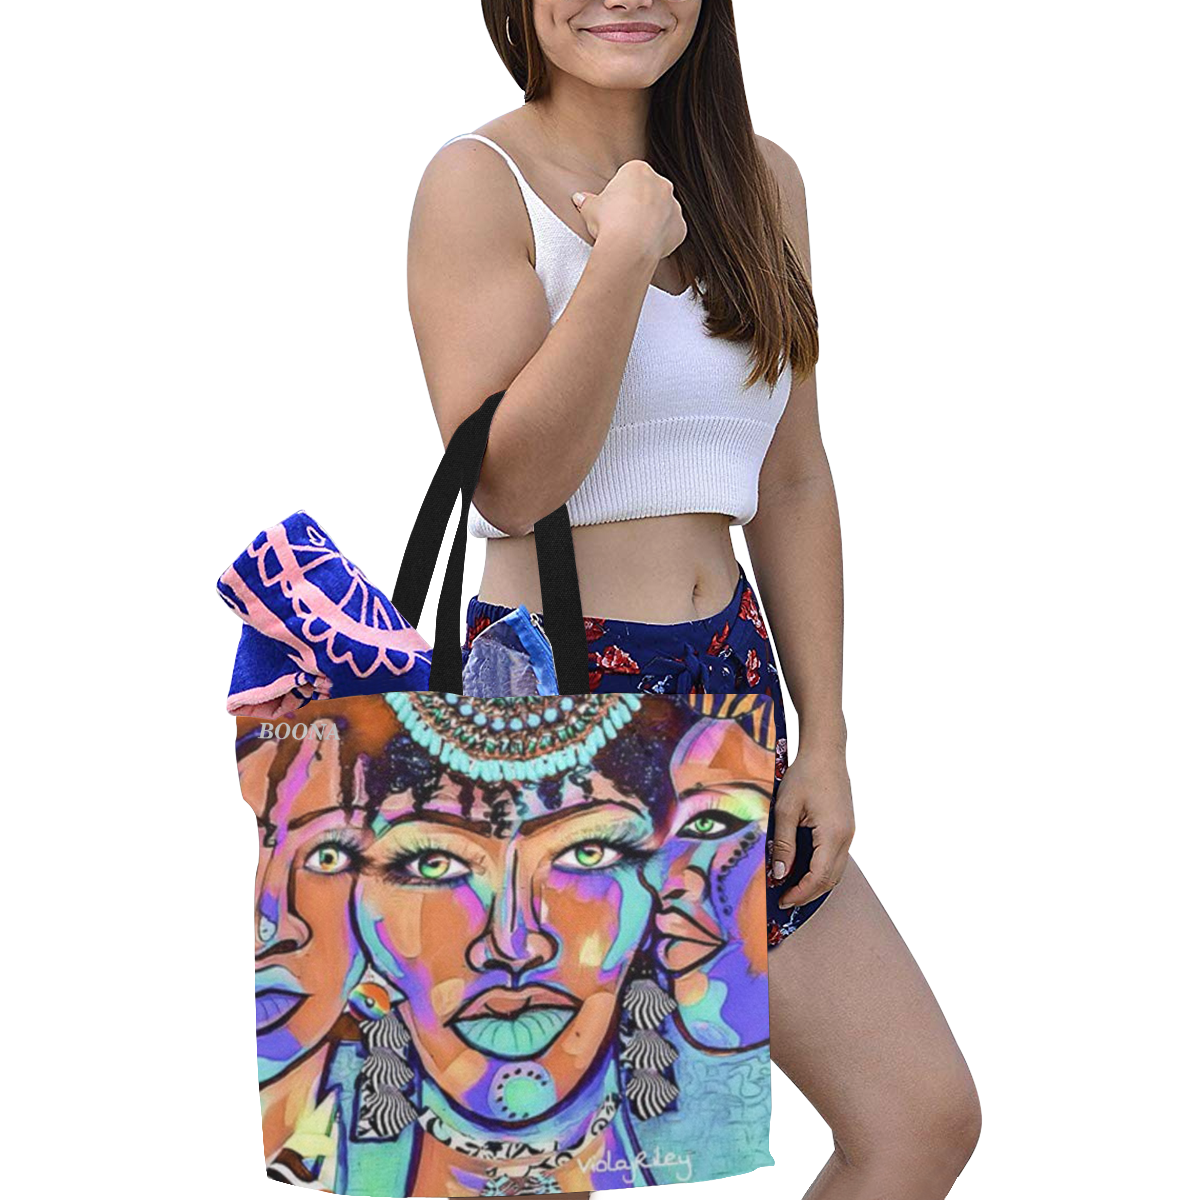 BOONA BAG All Over Print Canvas Tote Bag/Large (Model 1699)